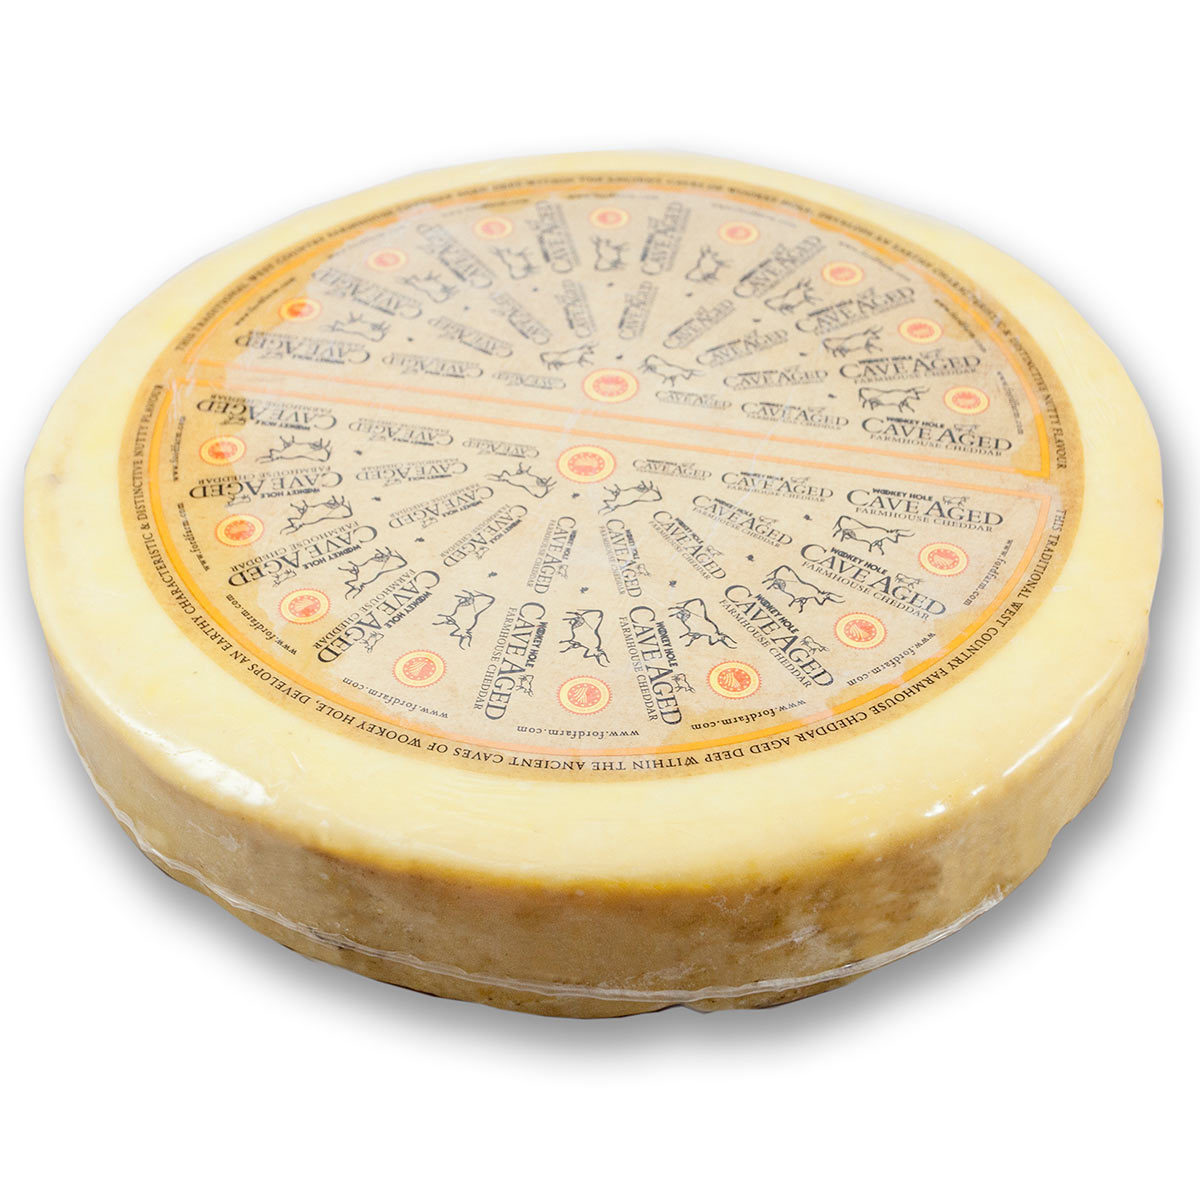 Mould Rinded Cave Aged West Country Farmhouse Cheddar, 6.75kg